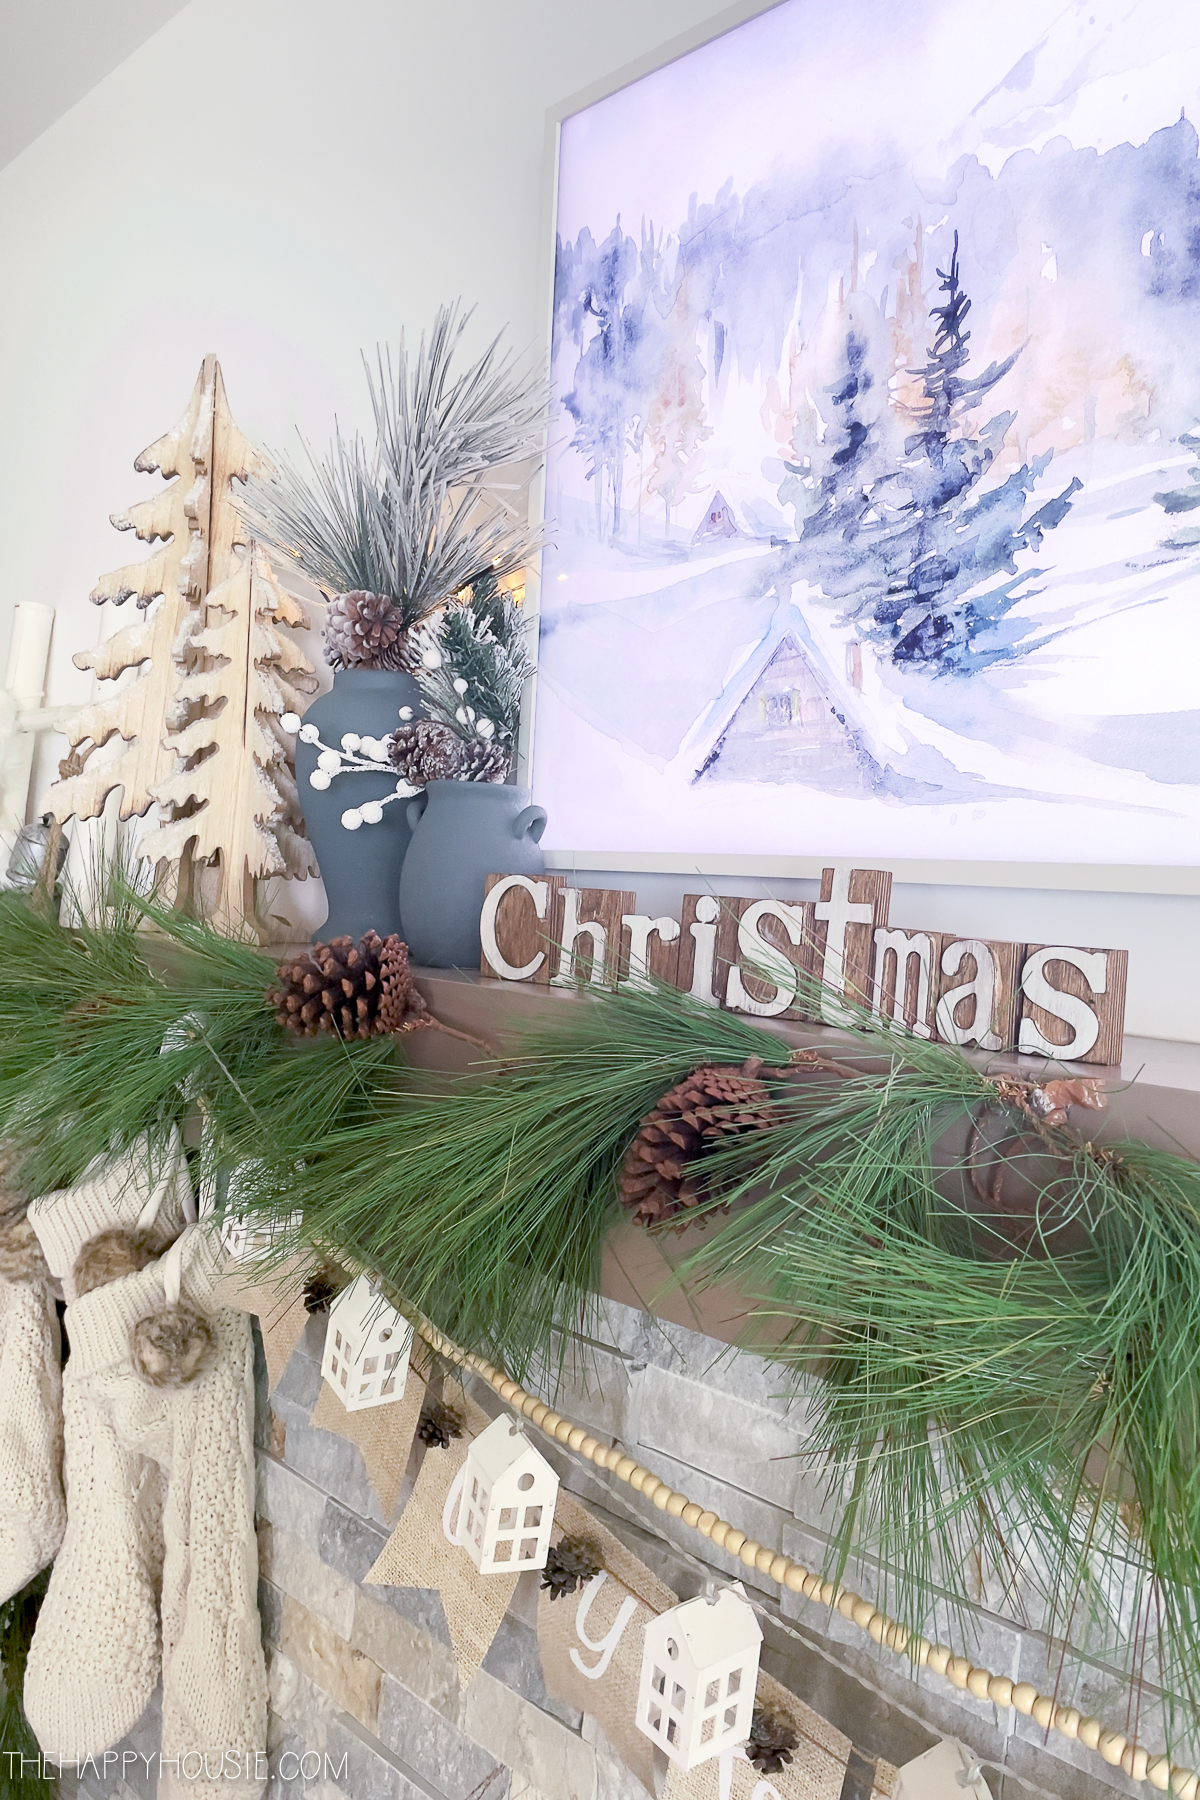 Wooden sign that says Christmas is on the mantel.